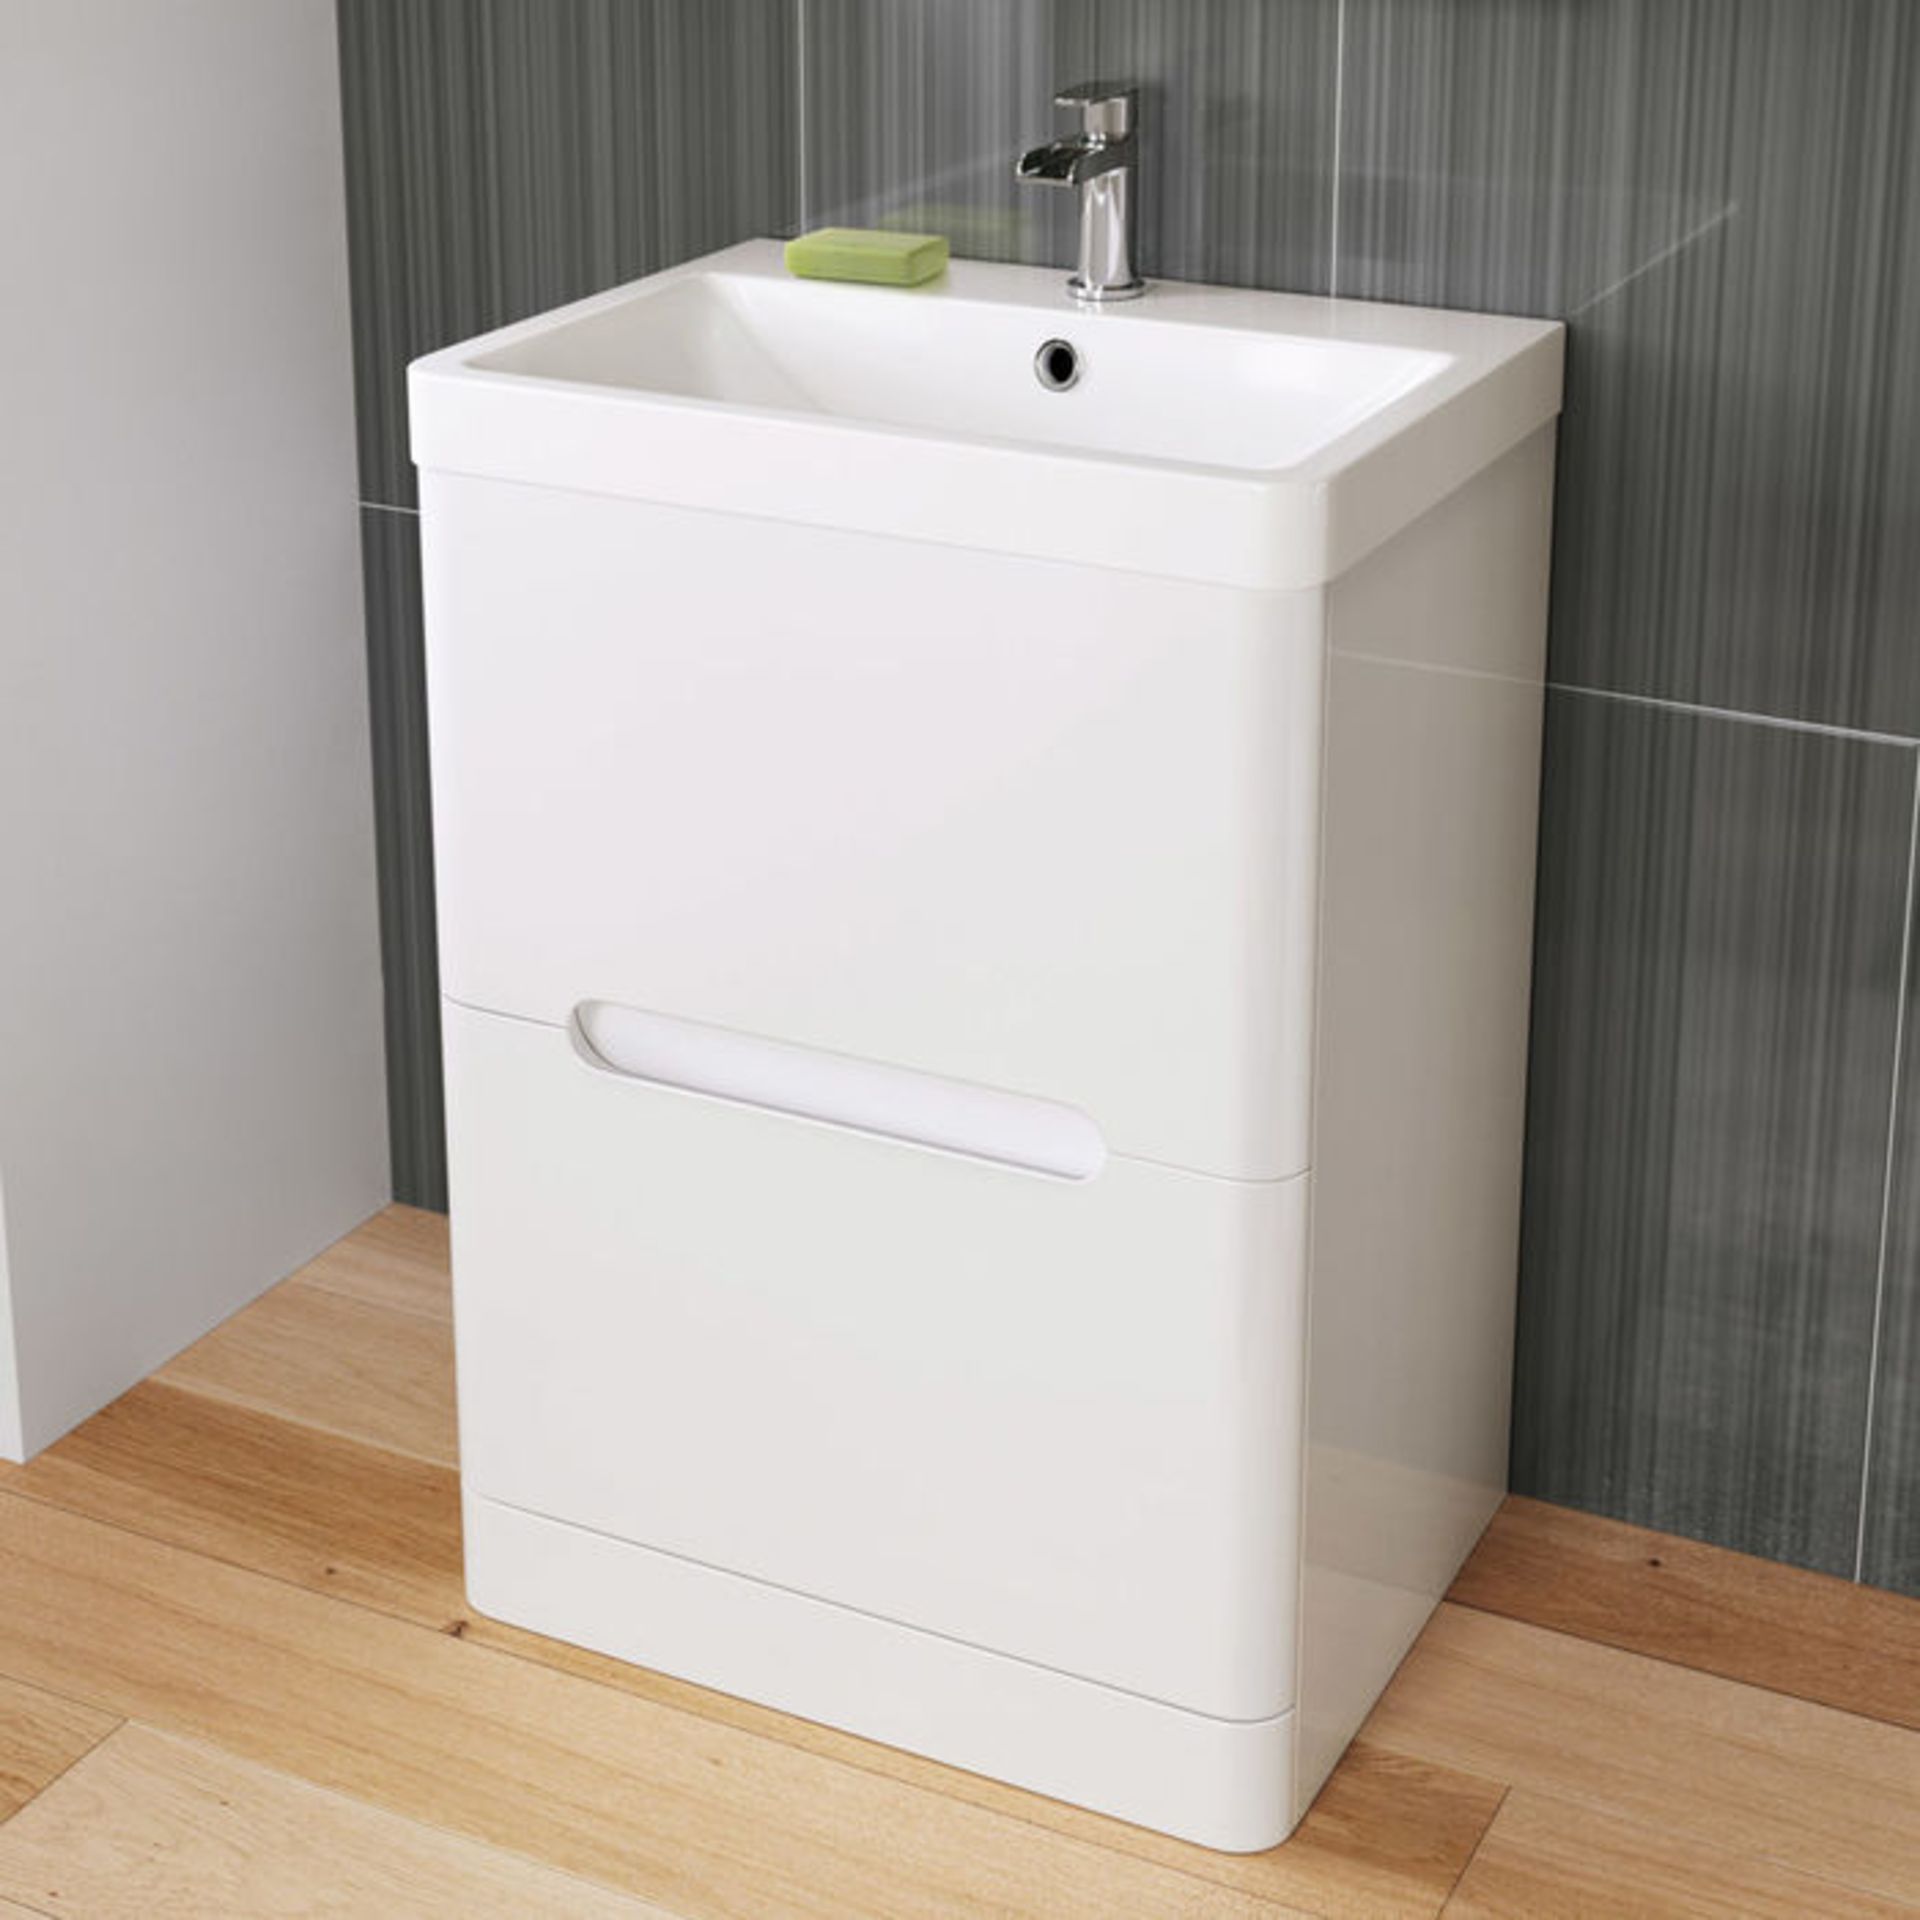 (G75) 600mm Tuscany Gloss White Built In Basin Double Drawer Unit - Floor Standing RRP £499.99.